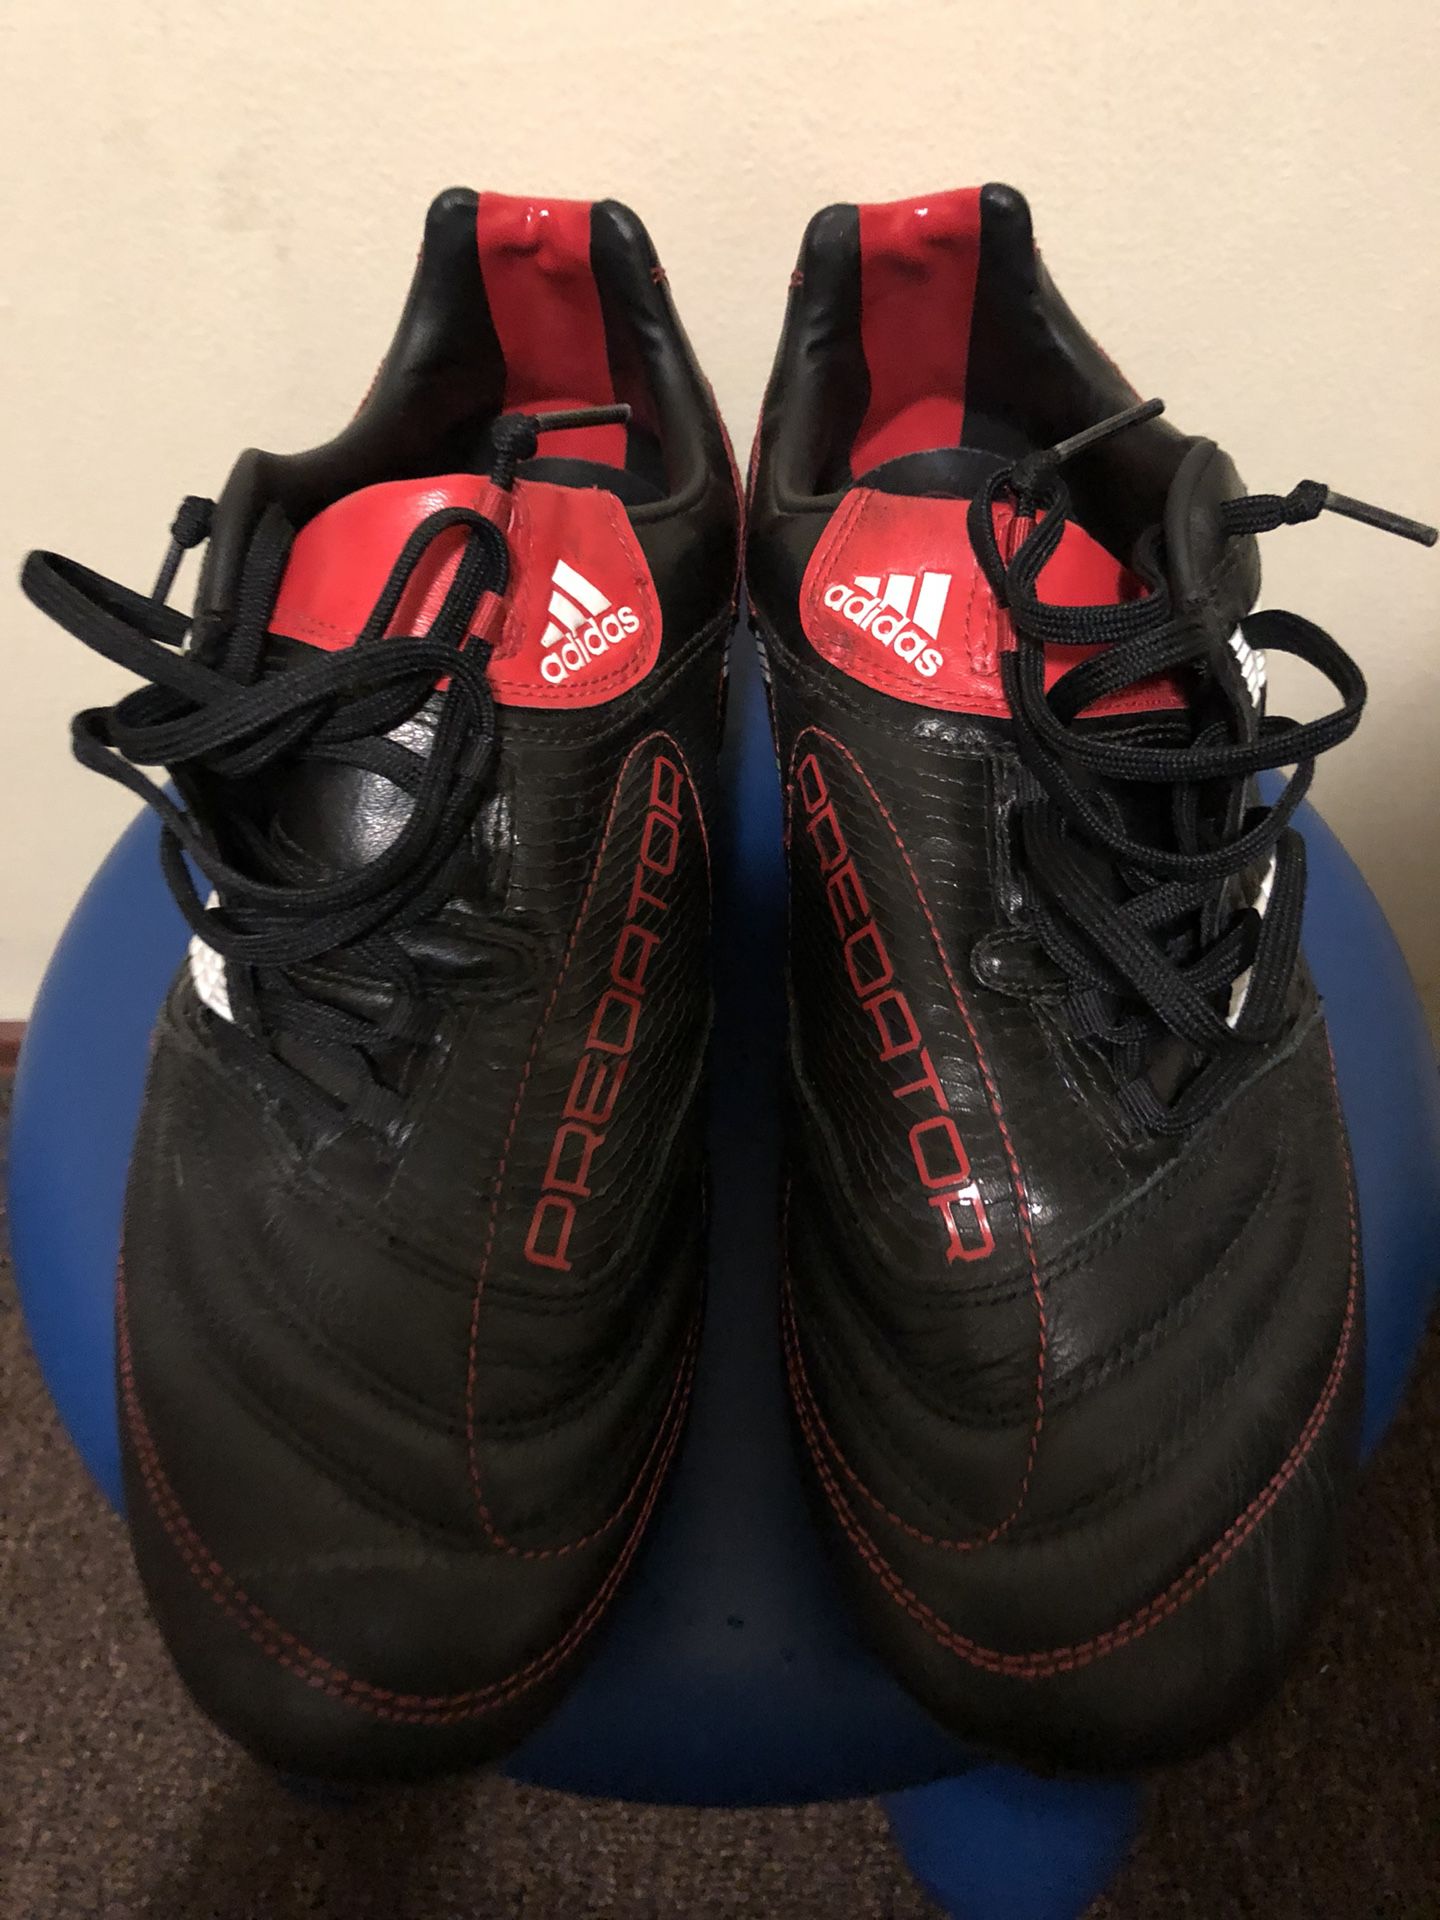 Adidas Predator Cleats Size 12K for Sale in Los Angeles, CA - OfferUp